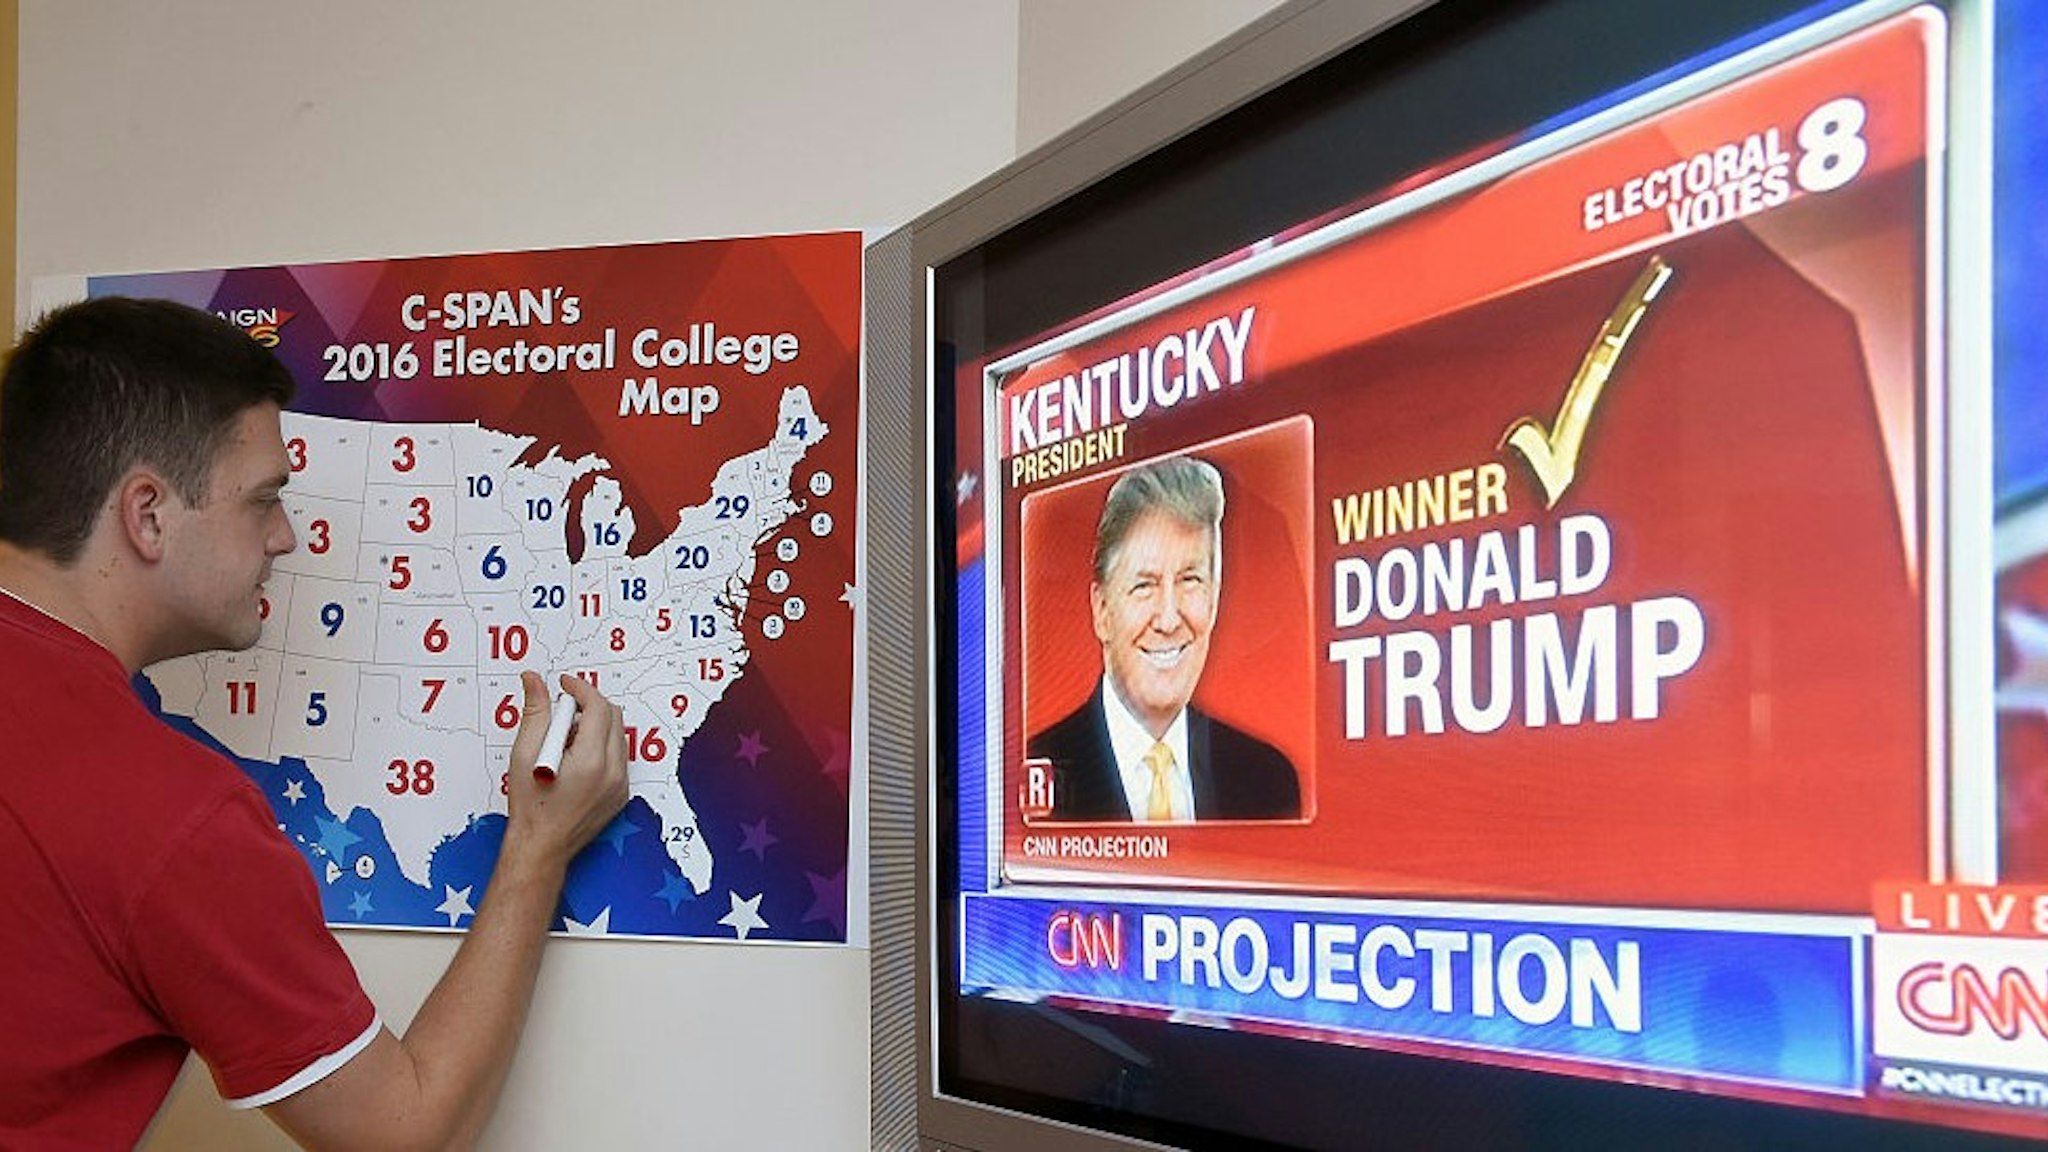 TOPSHOT - Jake Krupa colors in an electoral map as states are projected for Republican presidential candidate Donald Trump or Democratic Presidential candidate Hillary Clinton at an election watching party in Coconut Grove, Florida, on November 8, 2016. / AFP / RHONA WISE (Photo credit should read